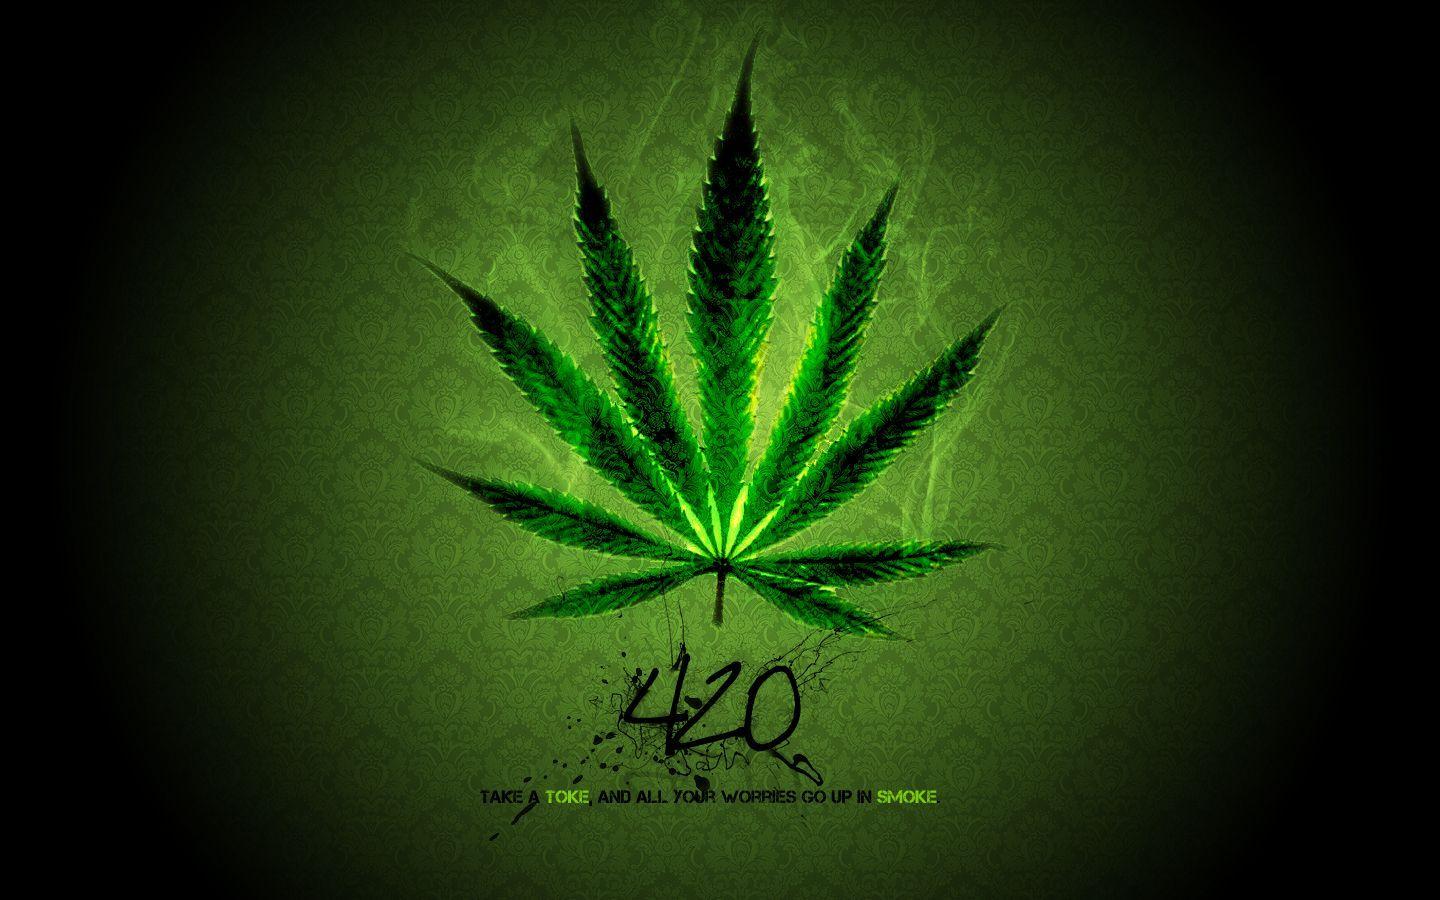 Weed Wallpaper HD Free download. Wallpaper, Background, Image